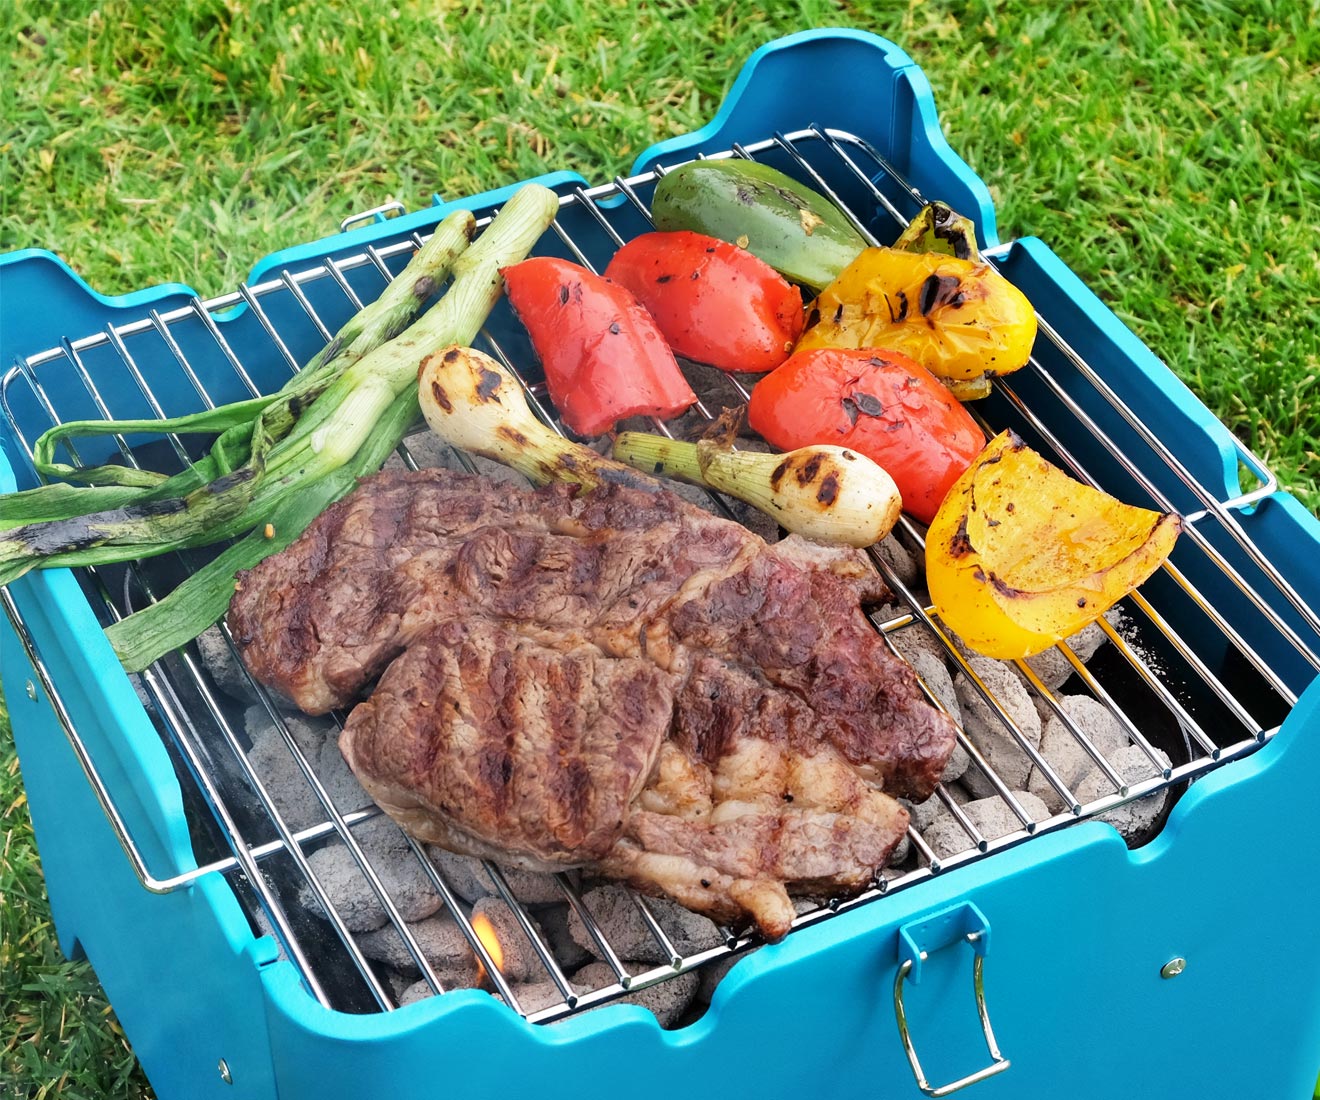 Permasteel Small Portable Charcoal Grill in Teal BBQ Flavor Flavored Grilled Veggies Meat Seafood Protein